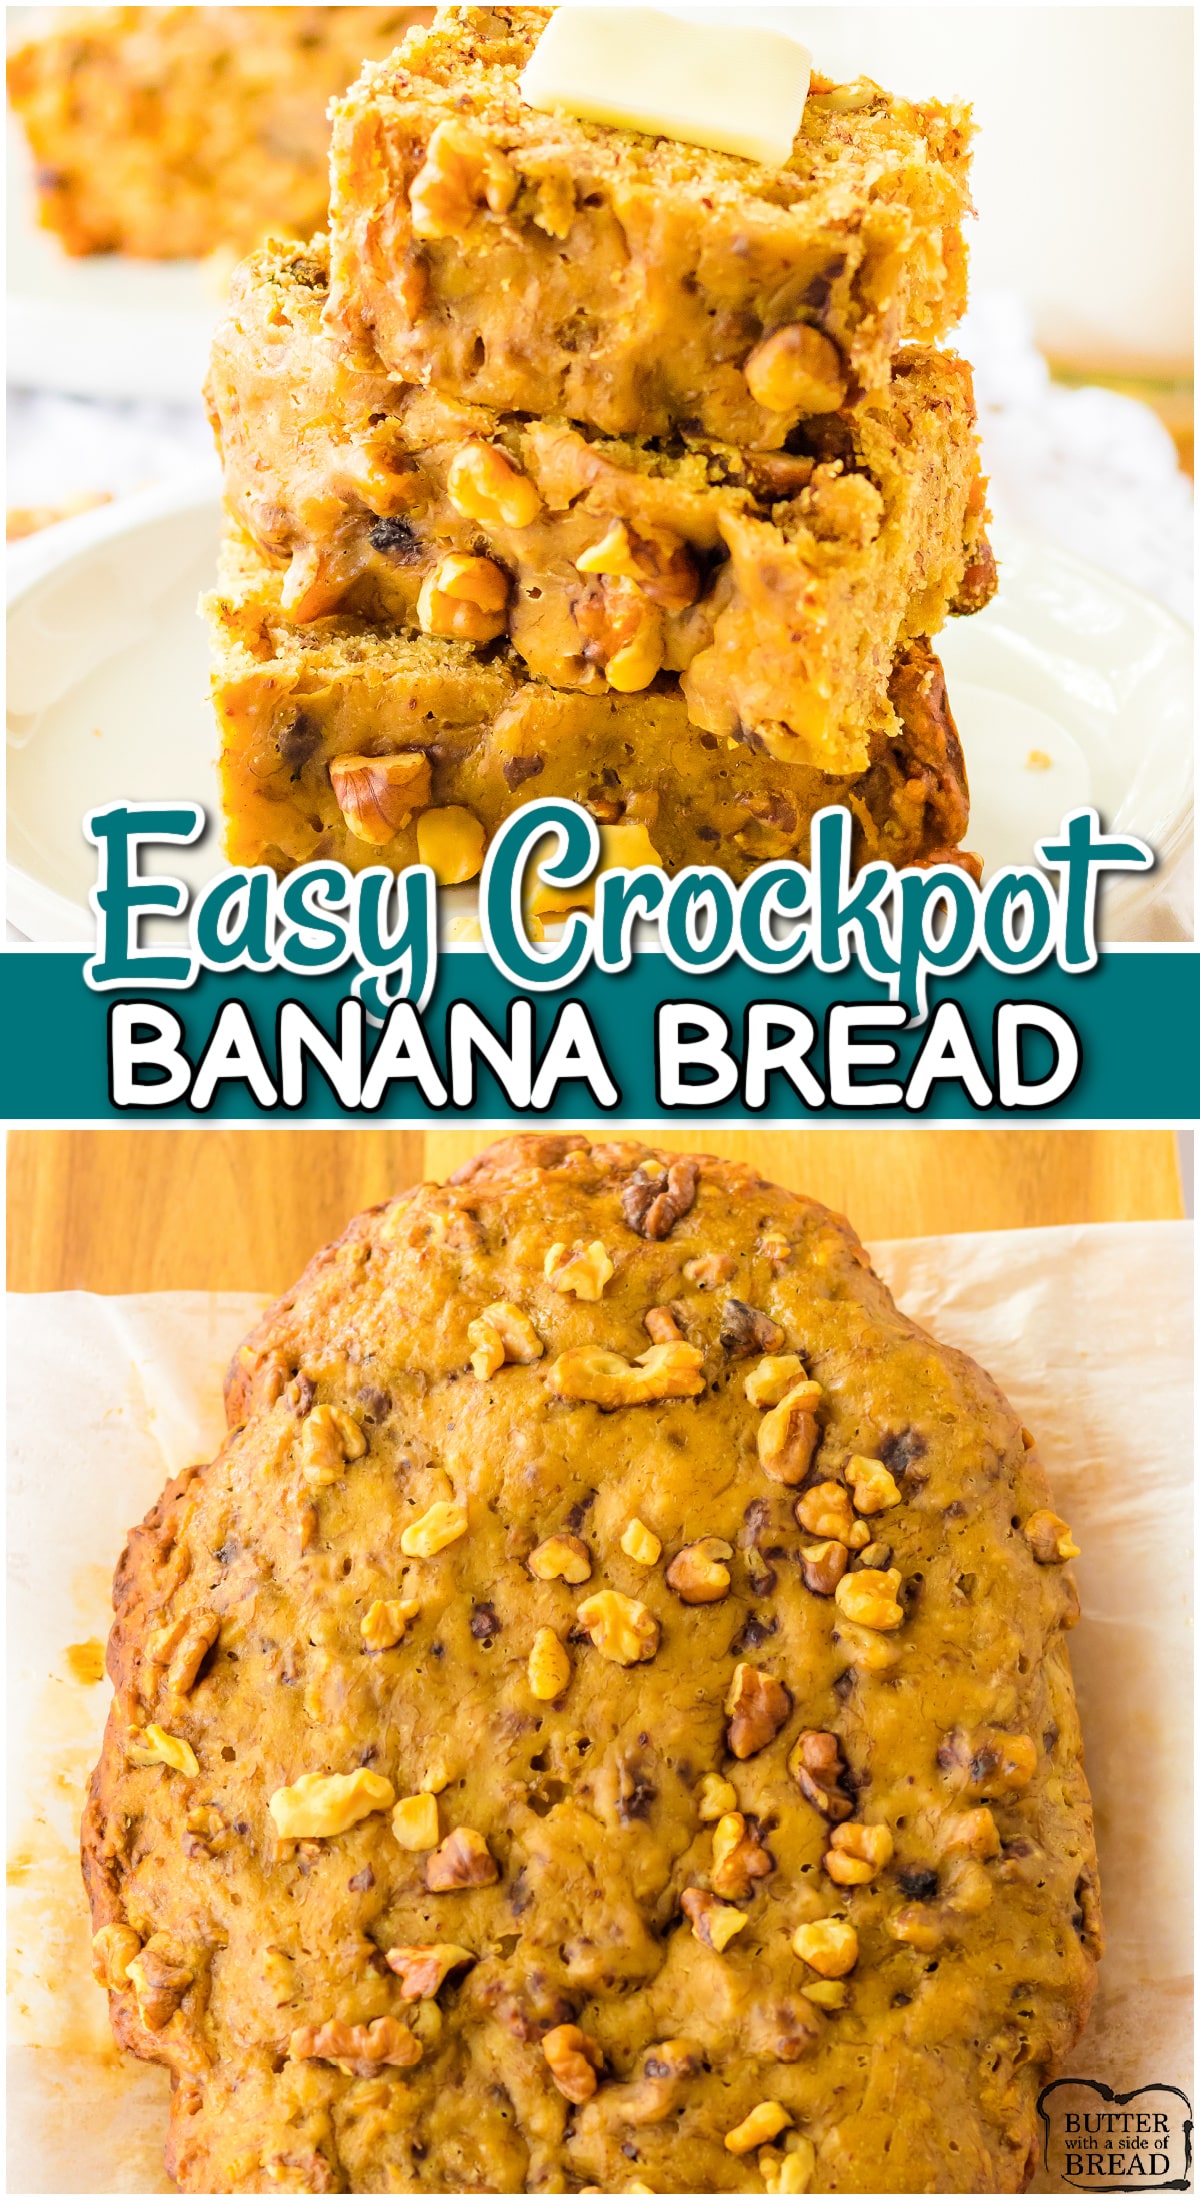 Slow Cooker Banana Bread is a hands off, no fuss way of making sweet bread! Perfectly spiced banana bread made with brown sugar, cinnamon and butter, all cooked in the crock pot! 